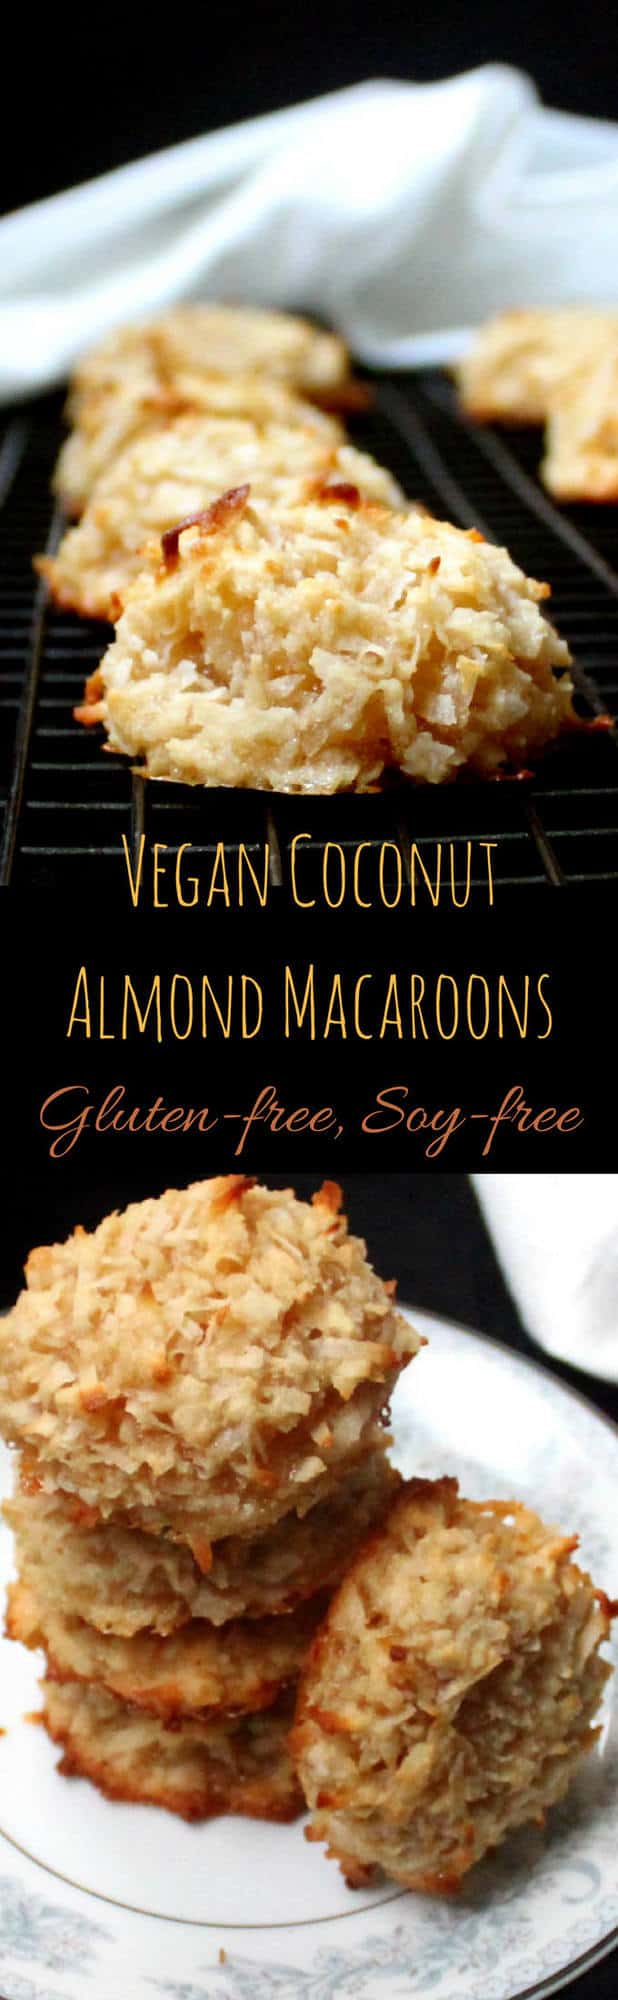 Macaroon images with text inlay that says "vegan coconut almond macaroons, gluten-free, soy-free"